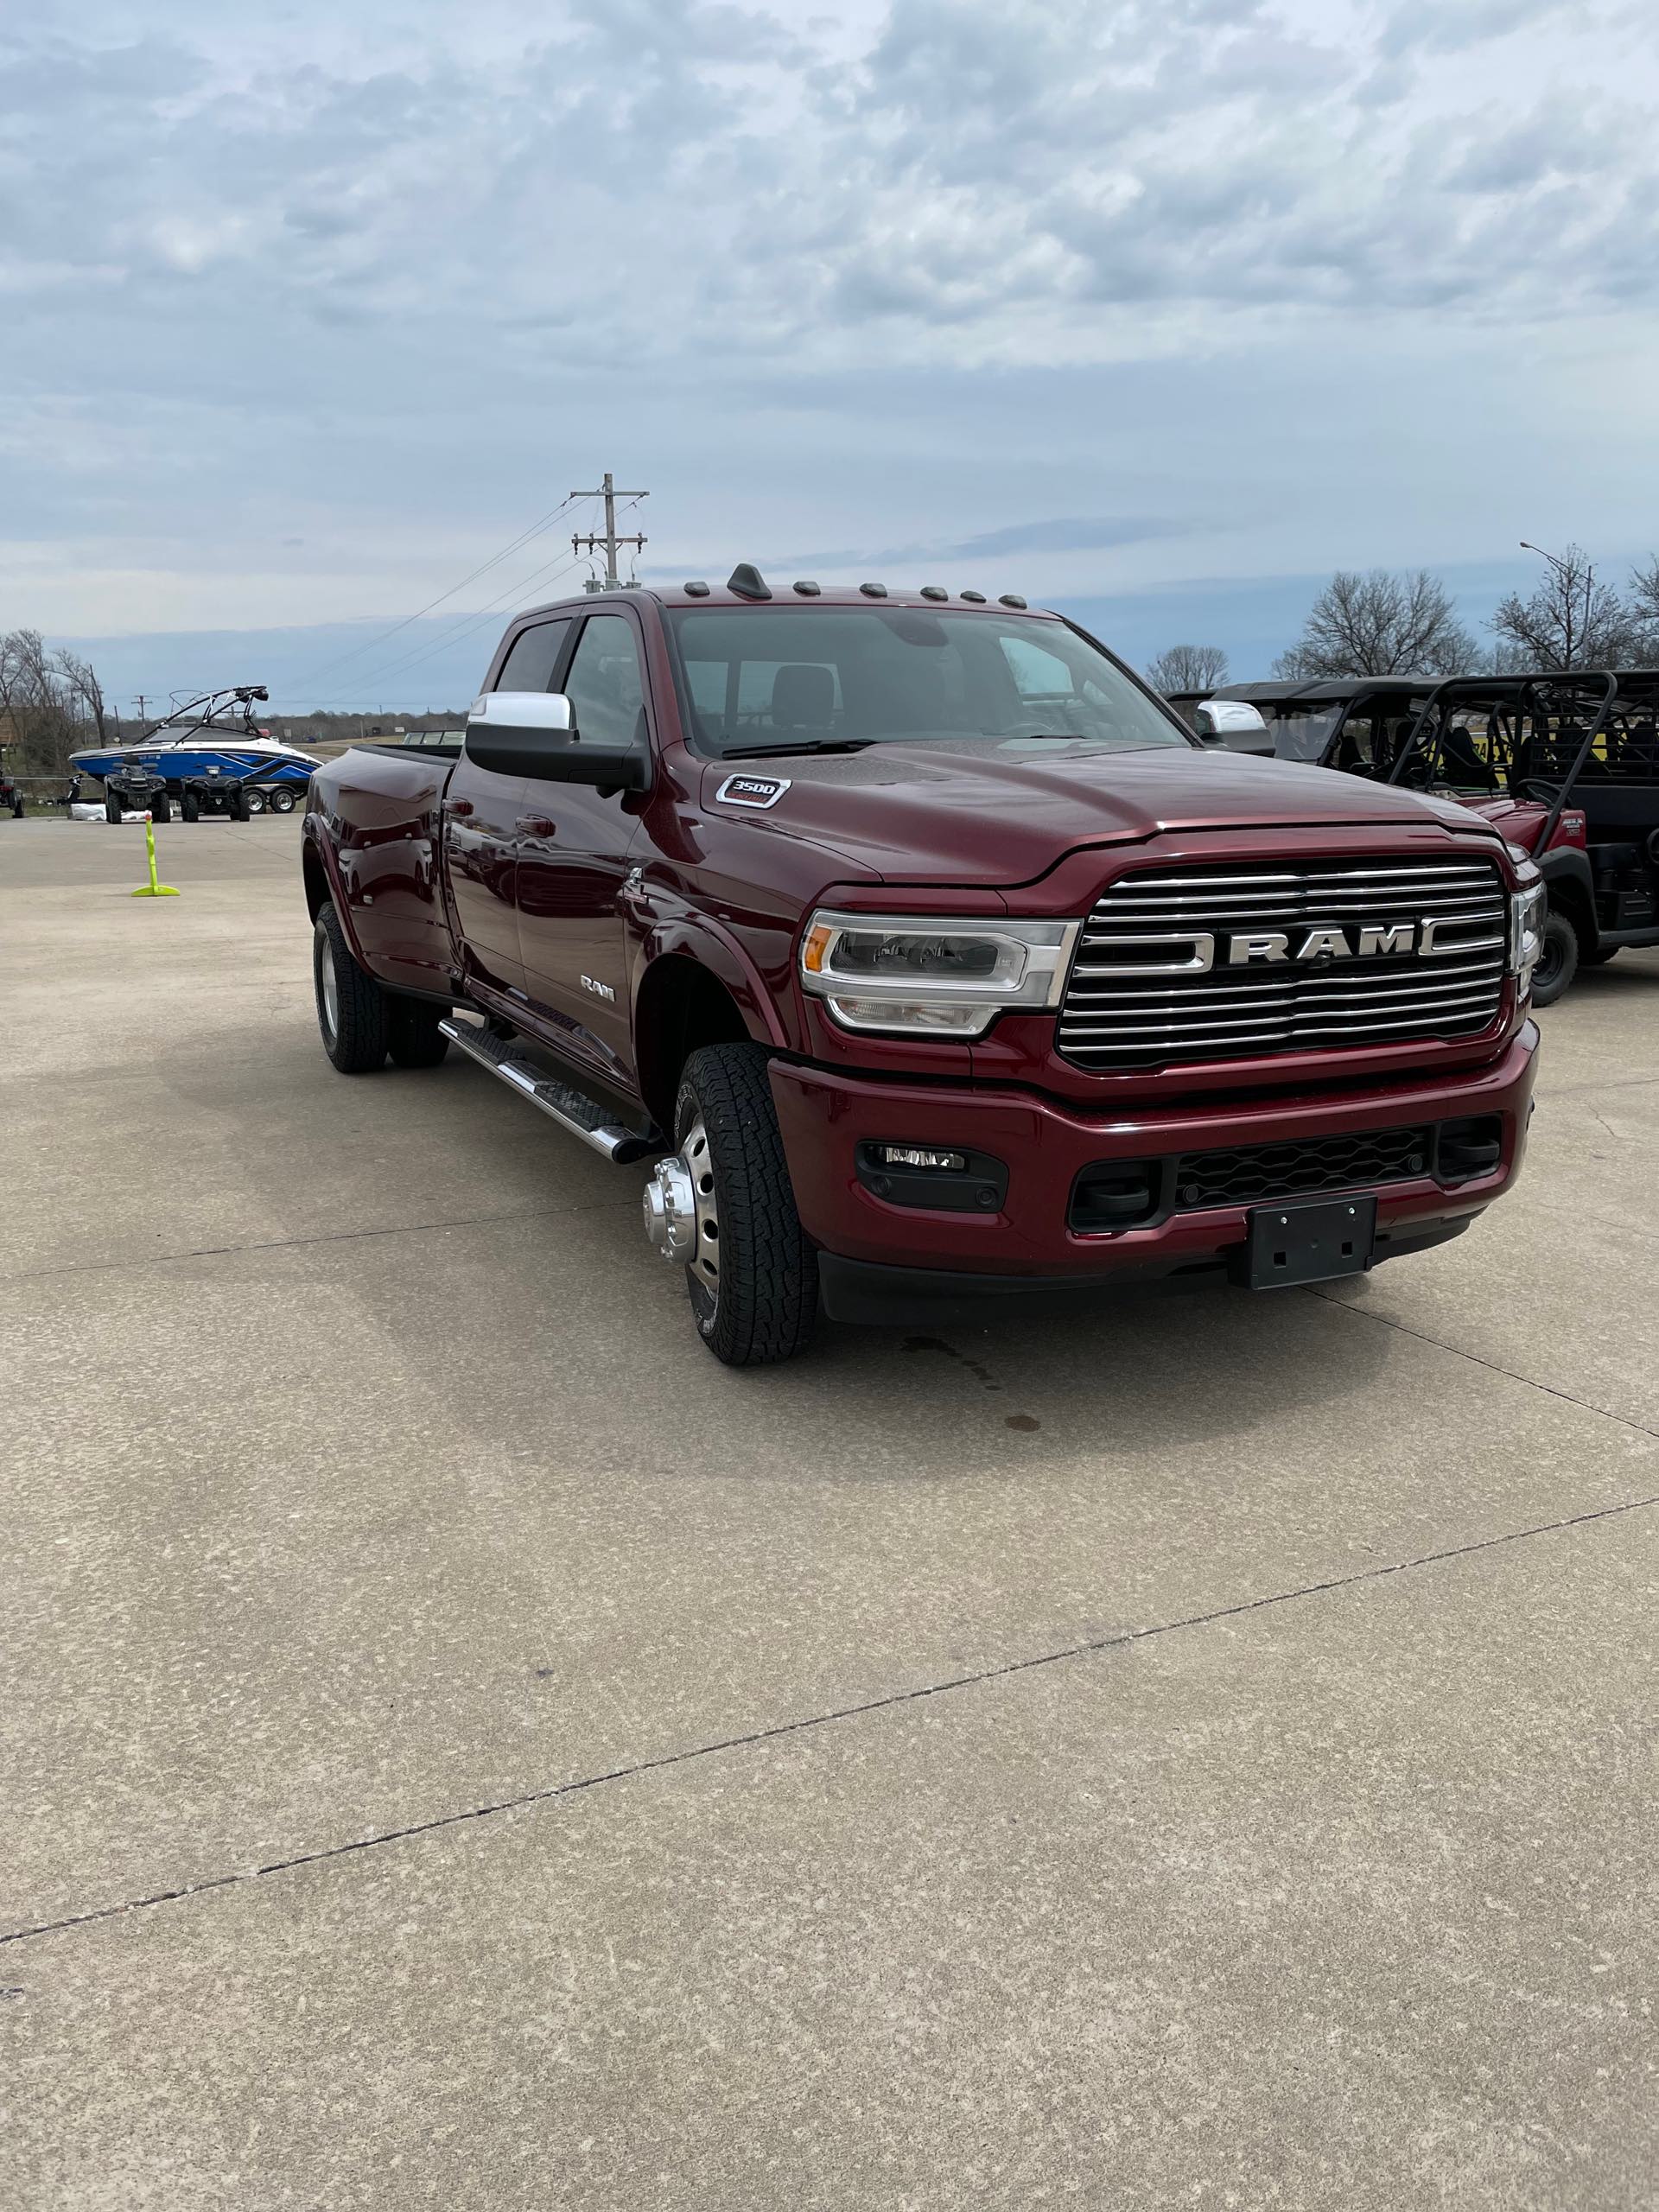 2019 Ram 3500 at Head Indian Motorcycle